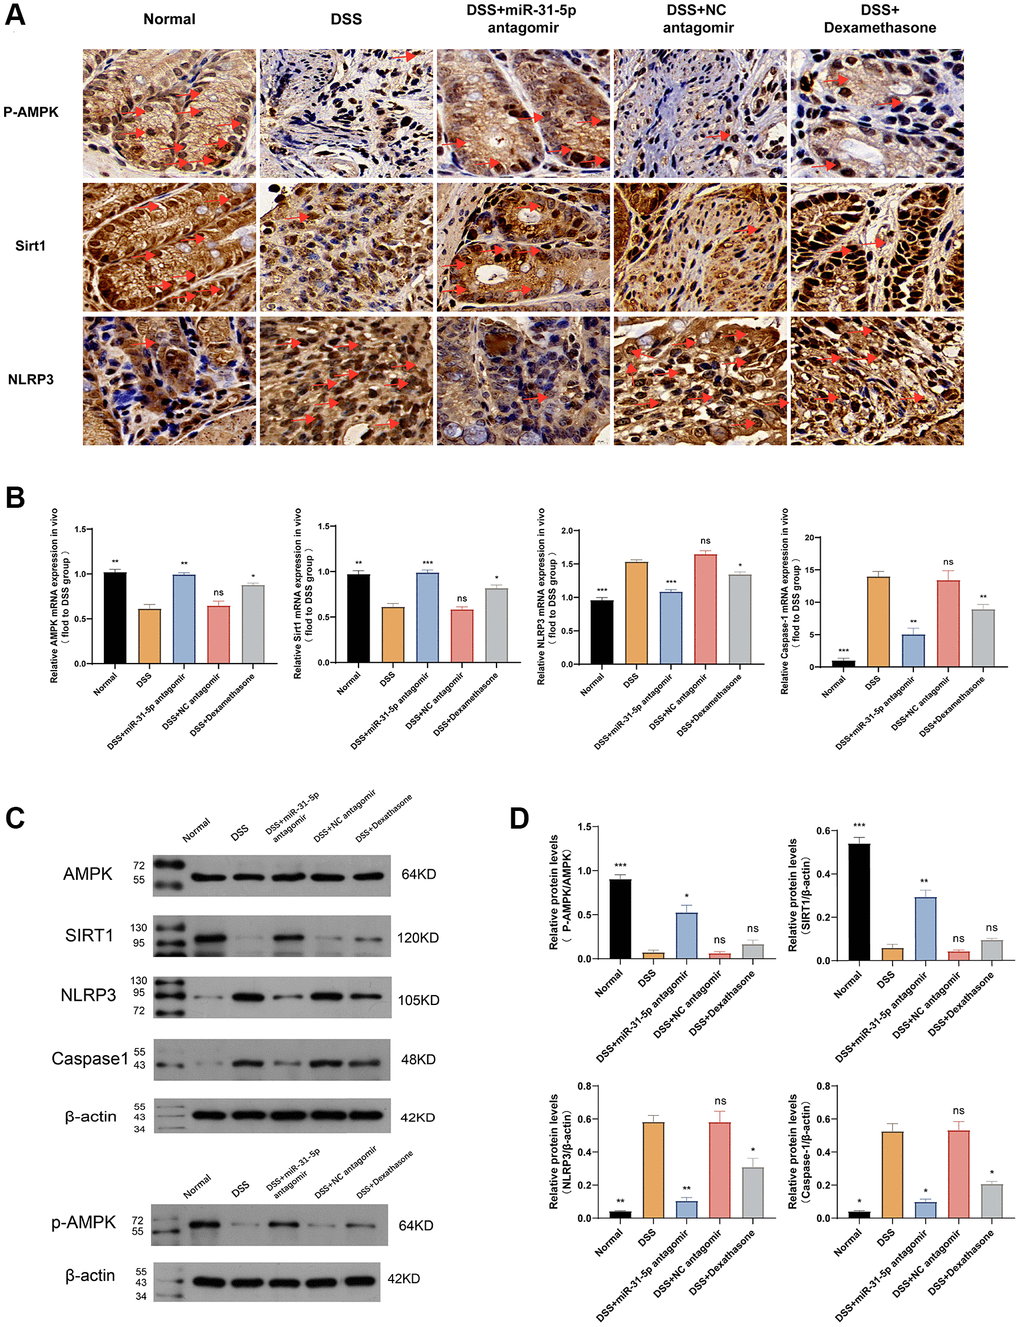 mir-31-5p may target AMPK/Sirt1/NLRP3 axis to mediate DSS-induced colonic mucosal inflammation in mice. (A) Immunohistochemical analysis of P-AMPK, Sirt1 and NLRP3 in colon of mice. Yellow brown were positive signals (the ruler was 10 um, and the positive signals were marked by red arrows). (B) The relative mRNA levels of AMPK, Sirt1, NLRP3 and caspase-1 in colon tissues of mice were detected by qPCR. (C) Western blot analysis of P-AMPK/AMPK, NLRP3, Sirt1 and caspase-1. (D) Quantitative protein analysis of P-AMPK/AMPK, Sirt1, NLRP3 and caspase-1. Each bar represents mean ± SD, n ≥ 5 from each group. Ns represented P > 0.05, *P **P ***P 